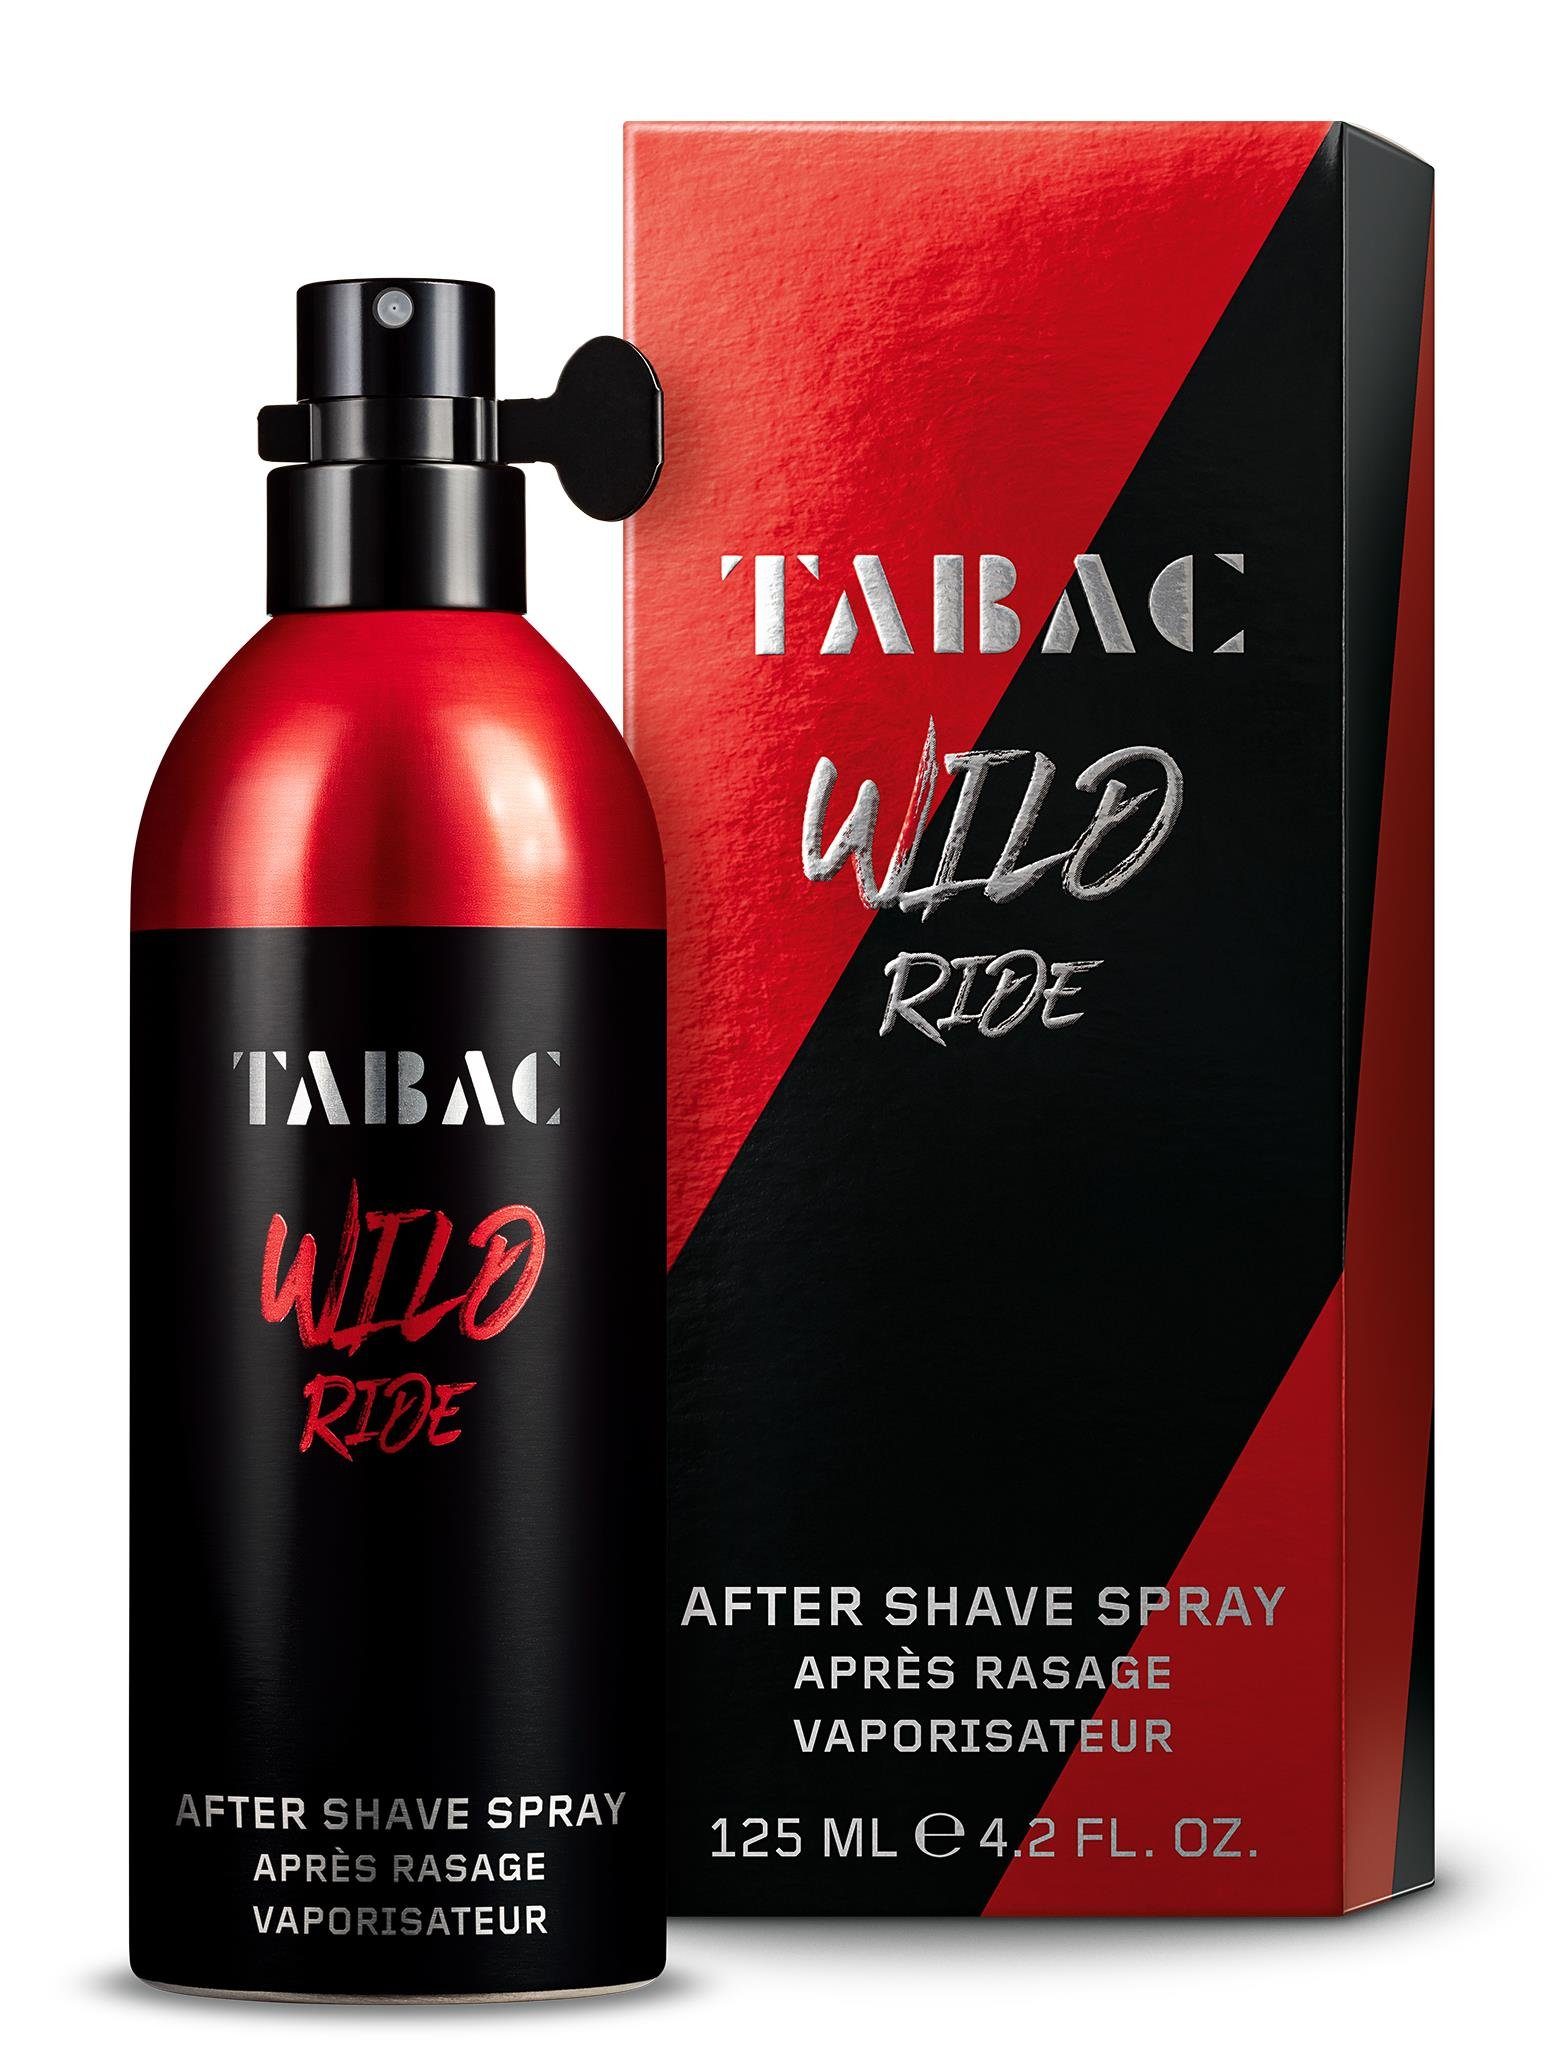 Tabac Wild Ride Gesichts-Reinigungslotion Tabac Shave After Wild 125 Lotion Ride ml